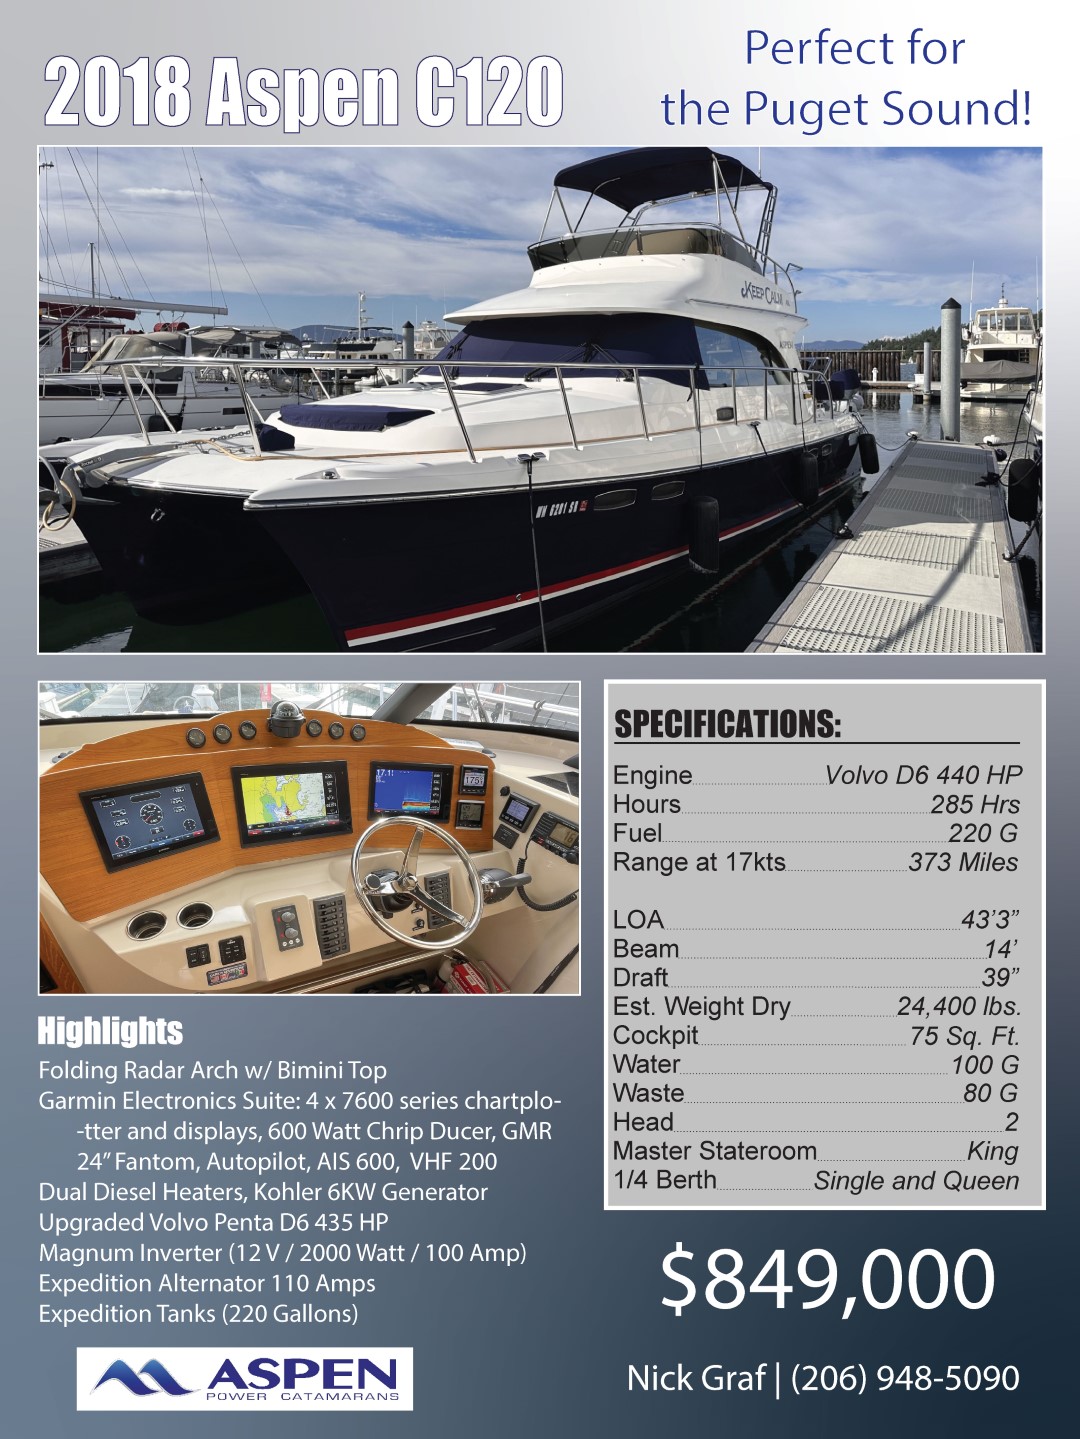 Have a Look at Our Brokerage Listings for Pre-Owned Yachts